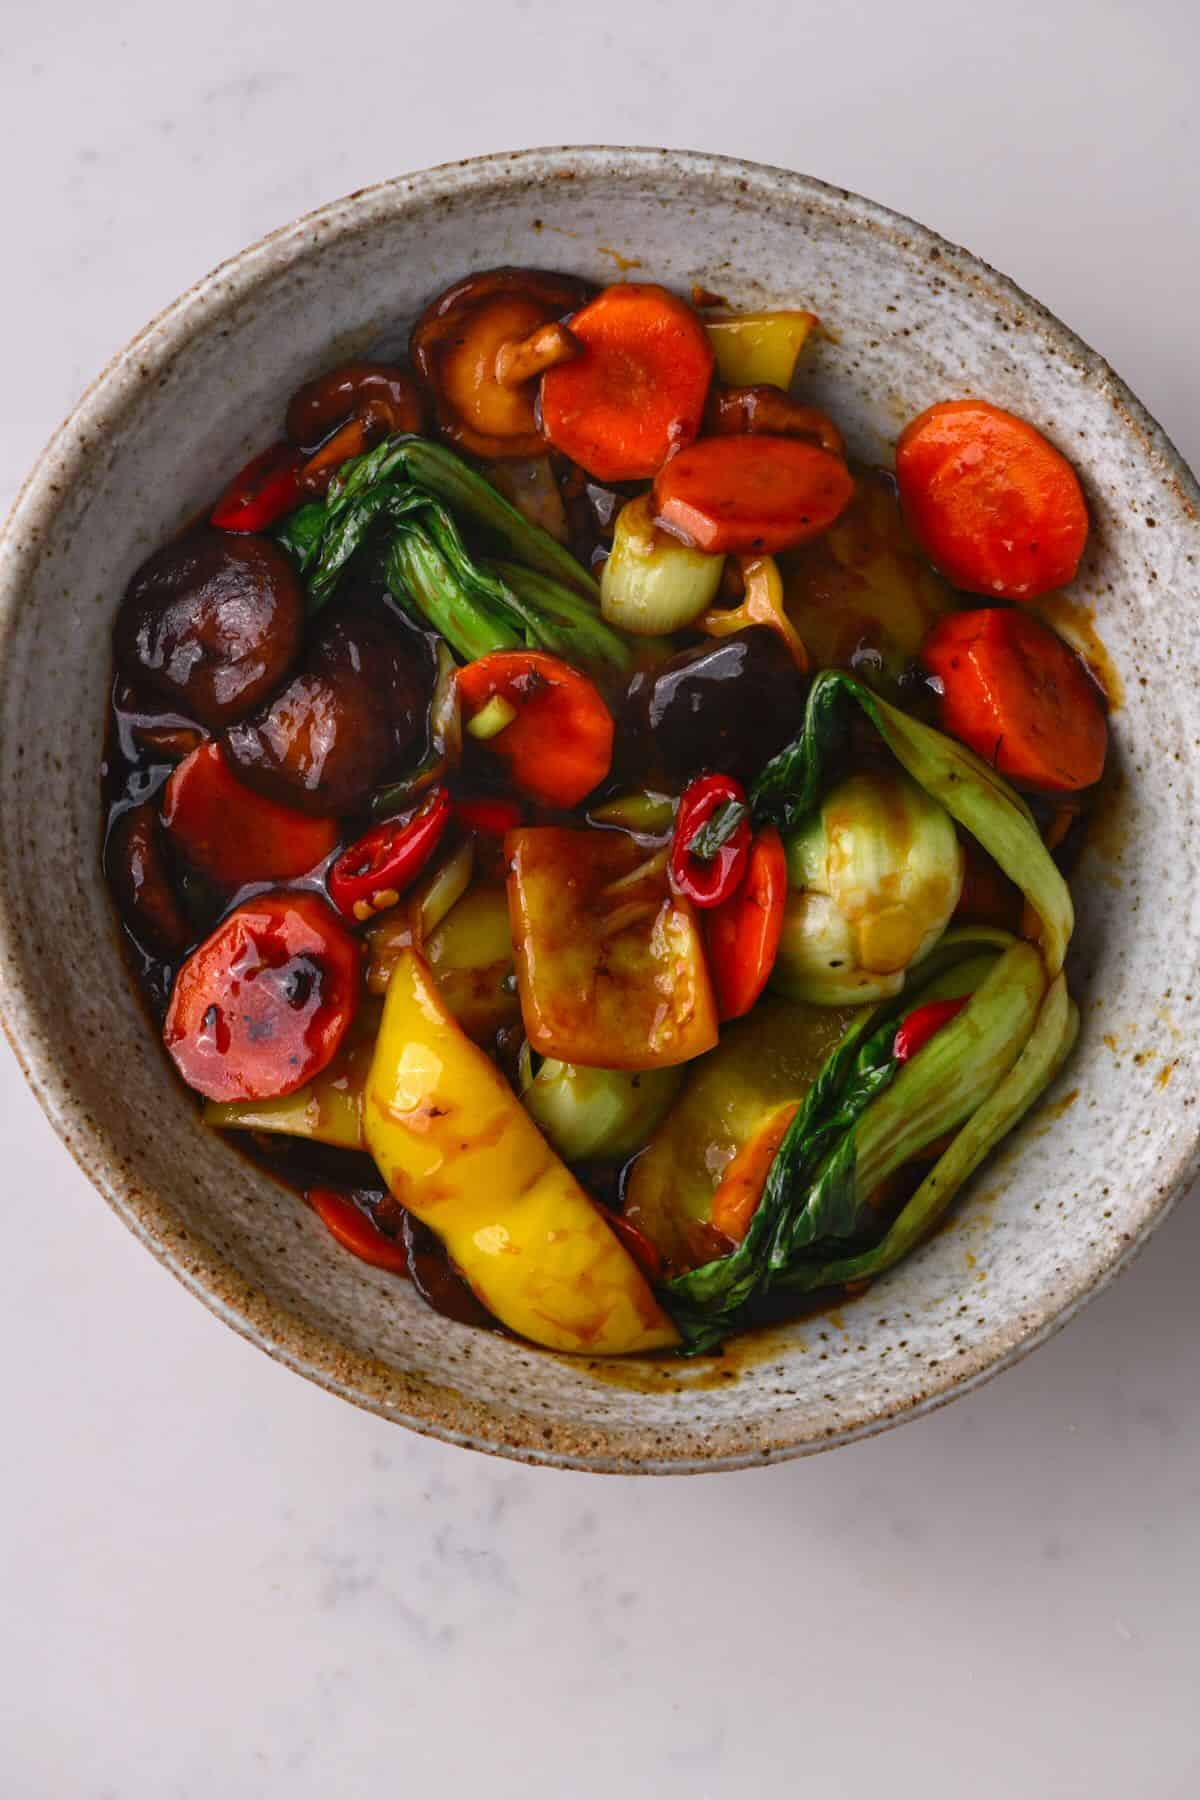 A bowl with vegetable stir fry